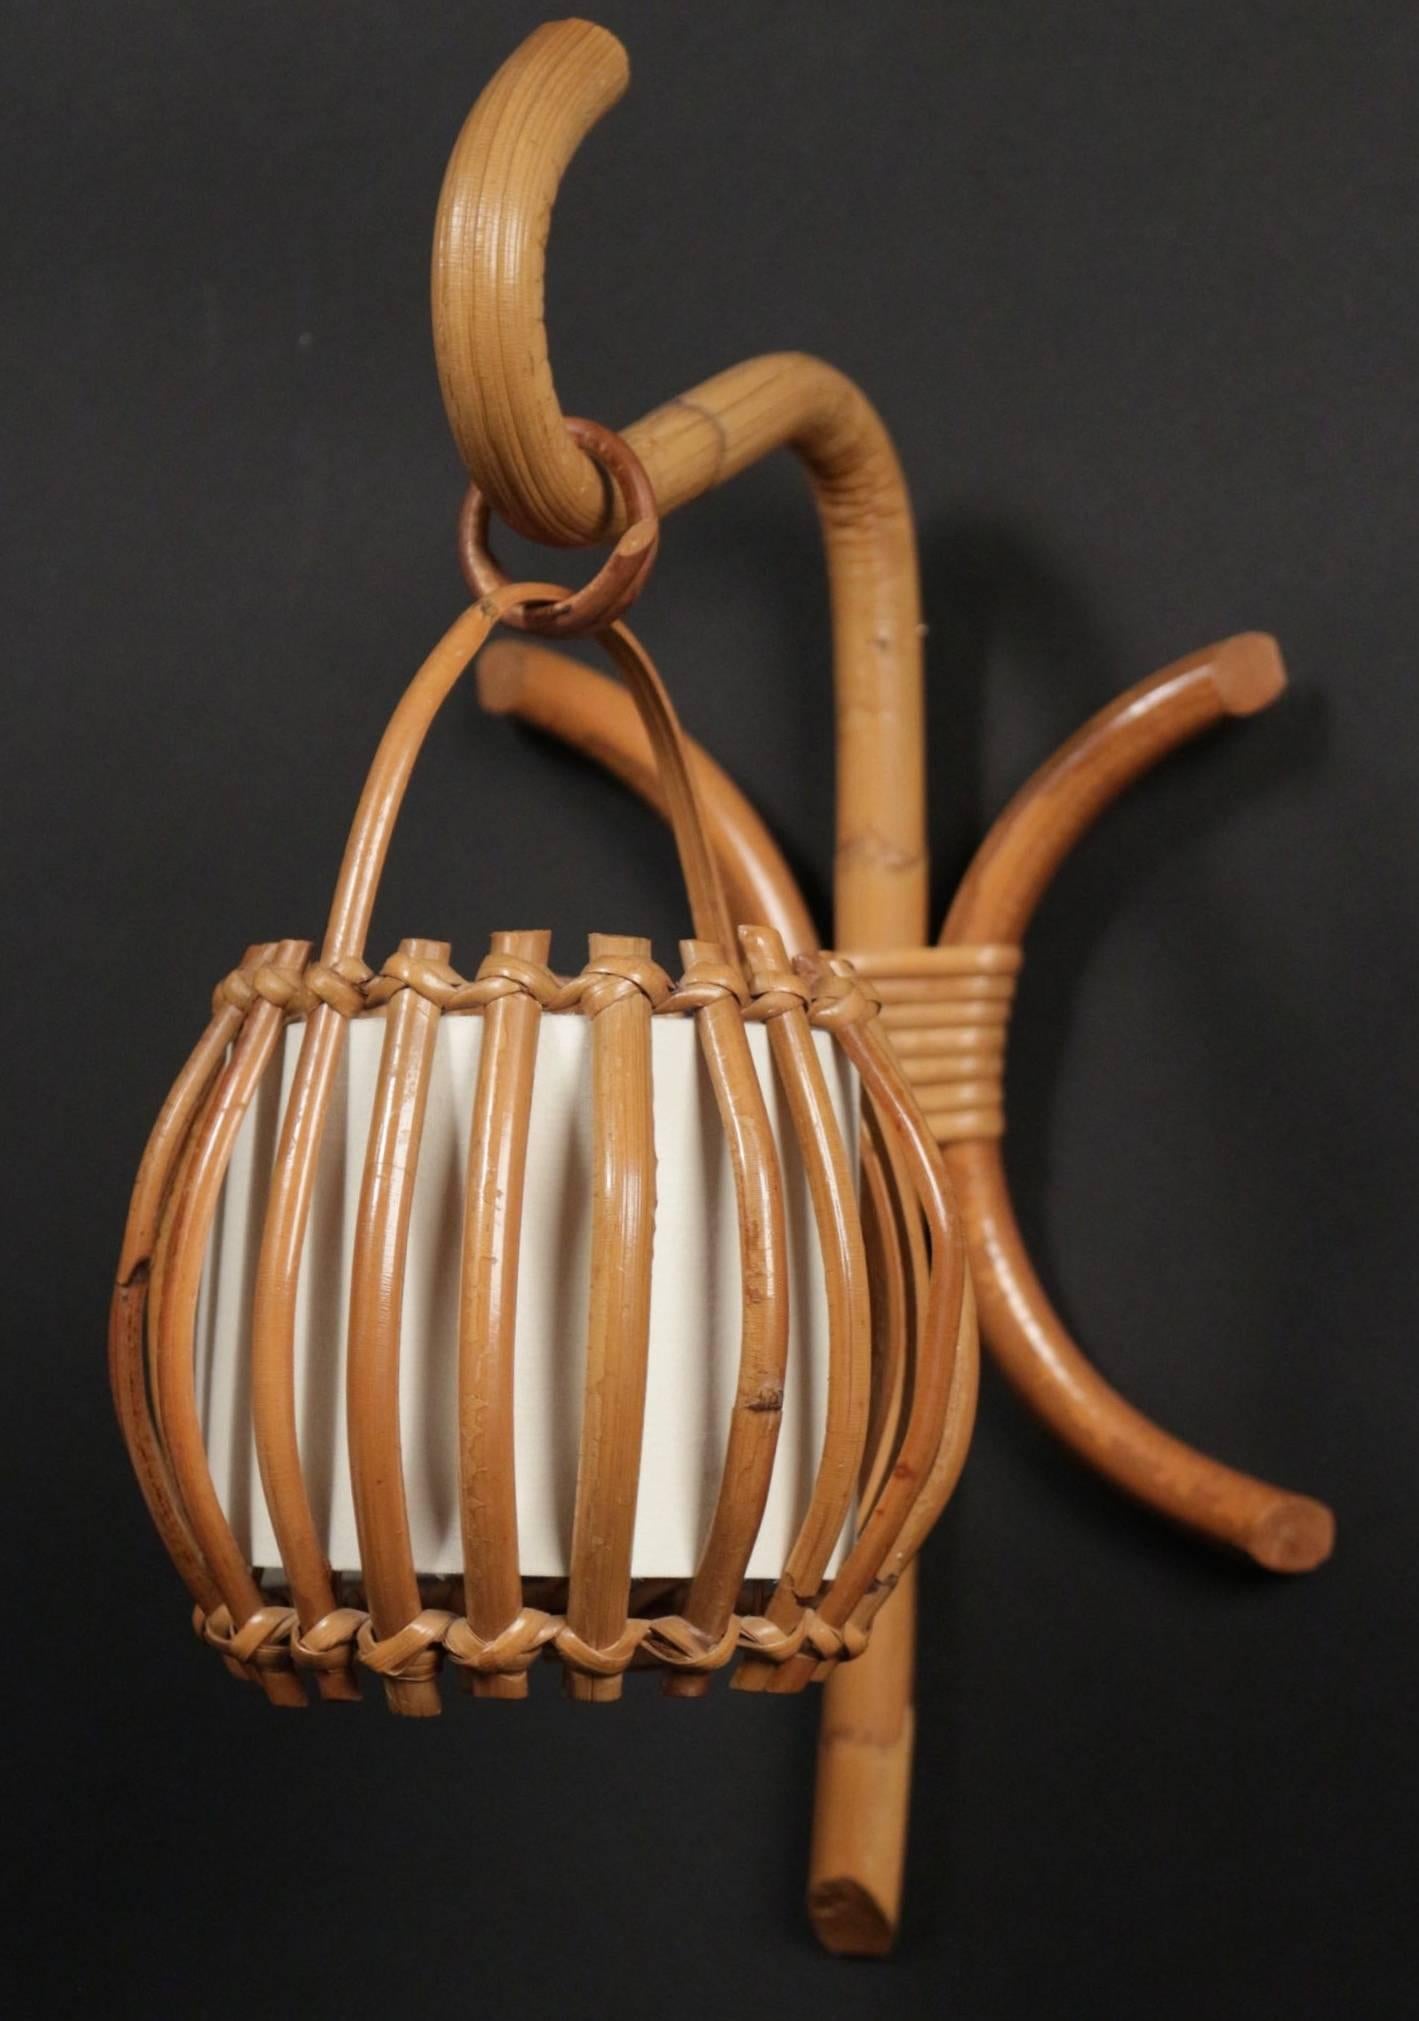 Pair of 1960s rattan "Lantern" sconces attributed to Louis Sognot.
Consist of a central rod underlined by two curved rattan sticks. On the top of the sconce a rattan buckle holds a cage shape lampshade dressed inside with cream white